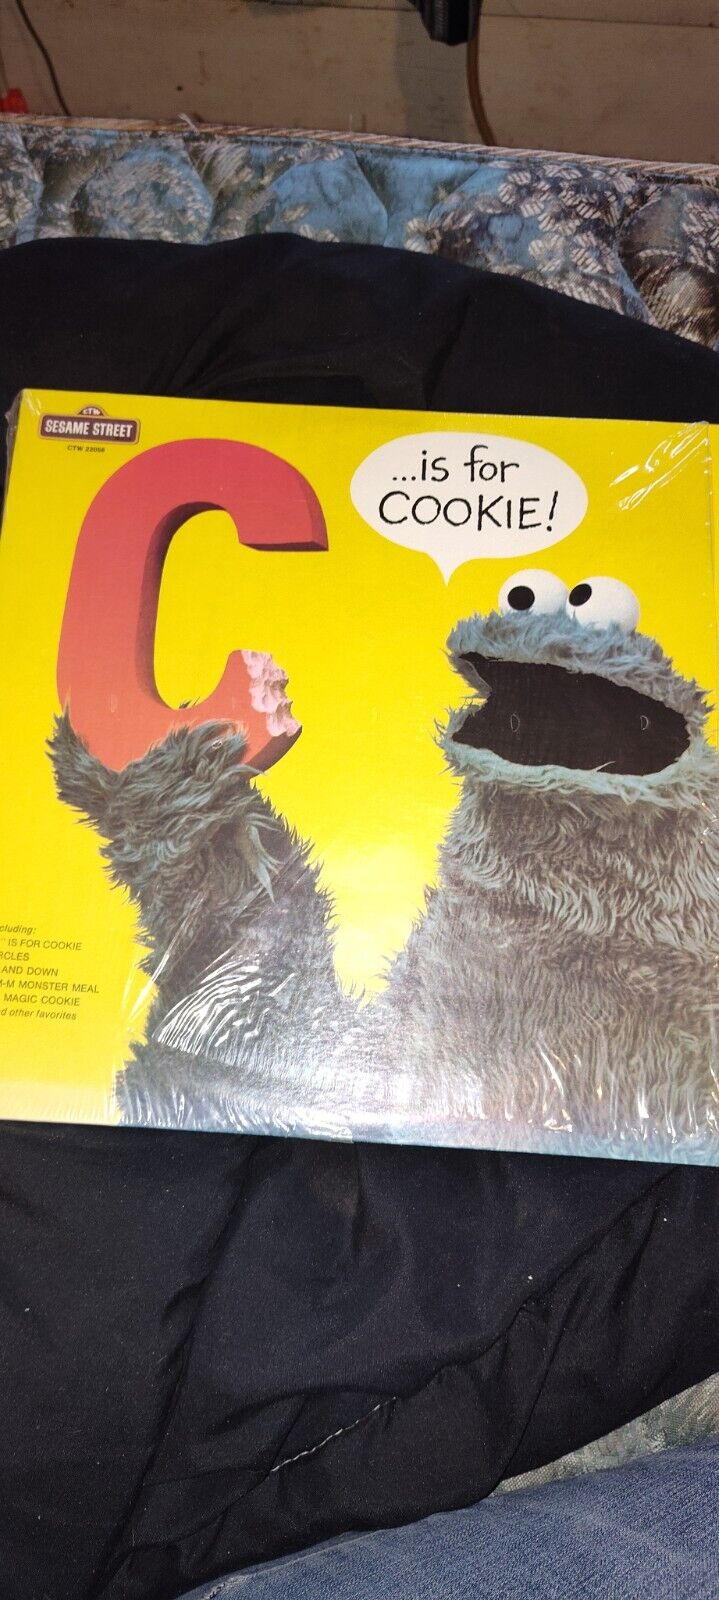 c is for cookie Record